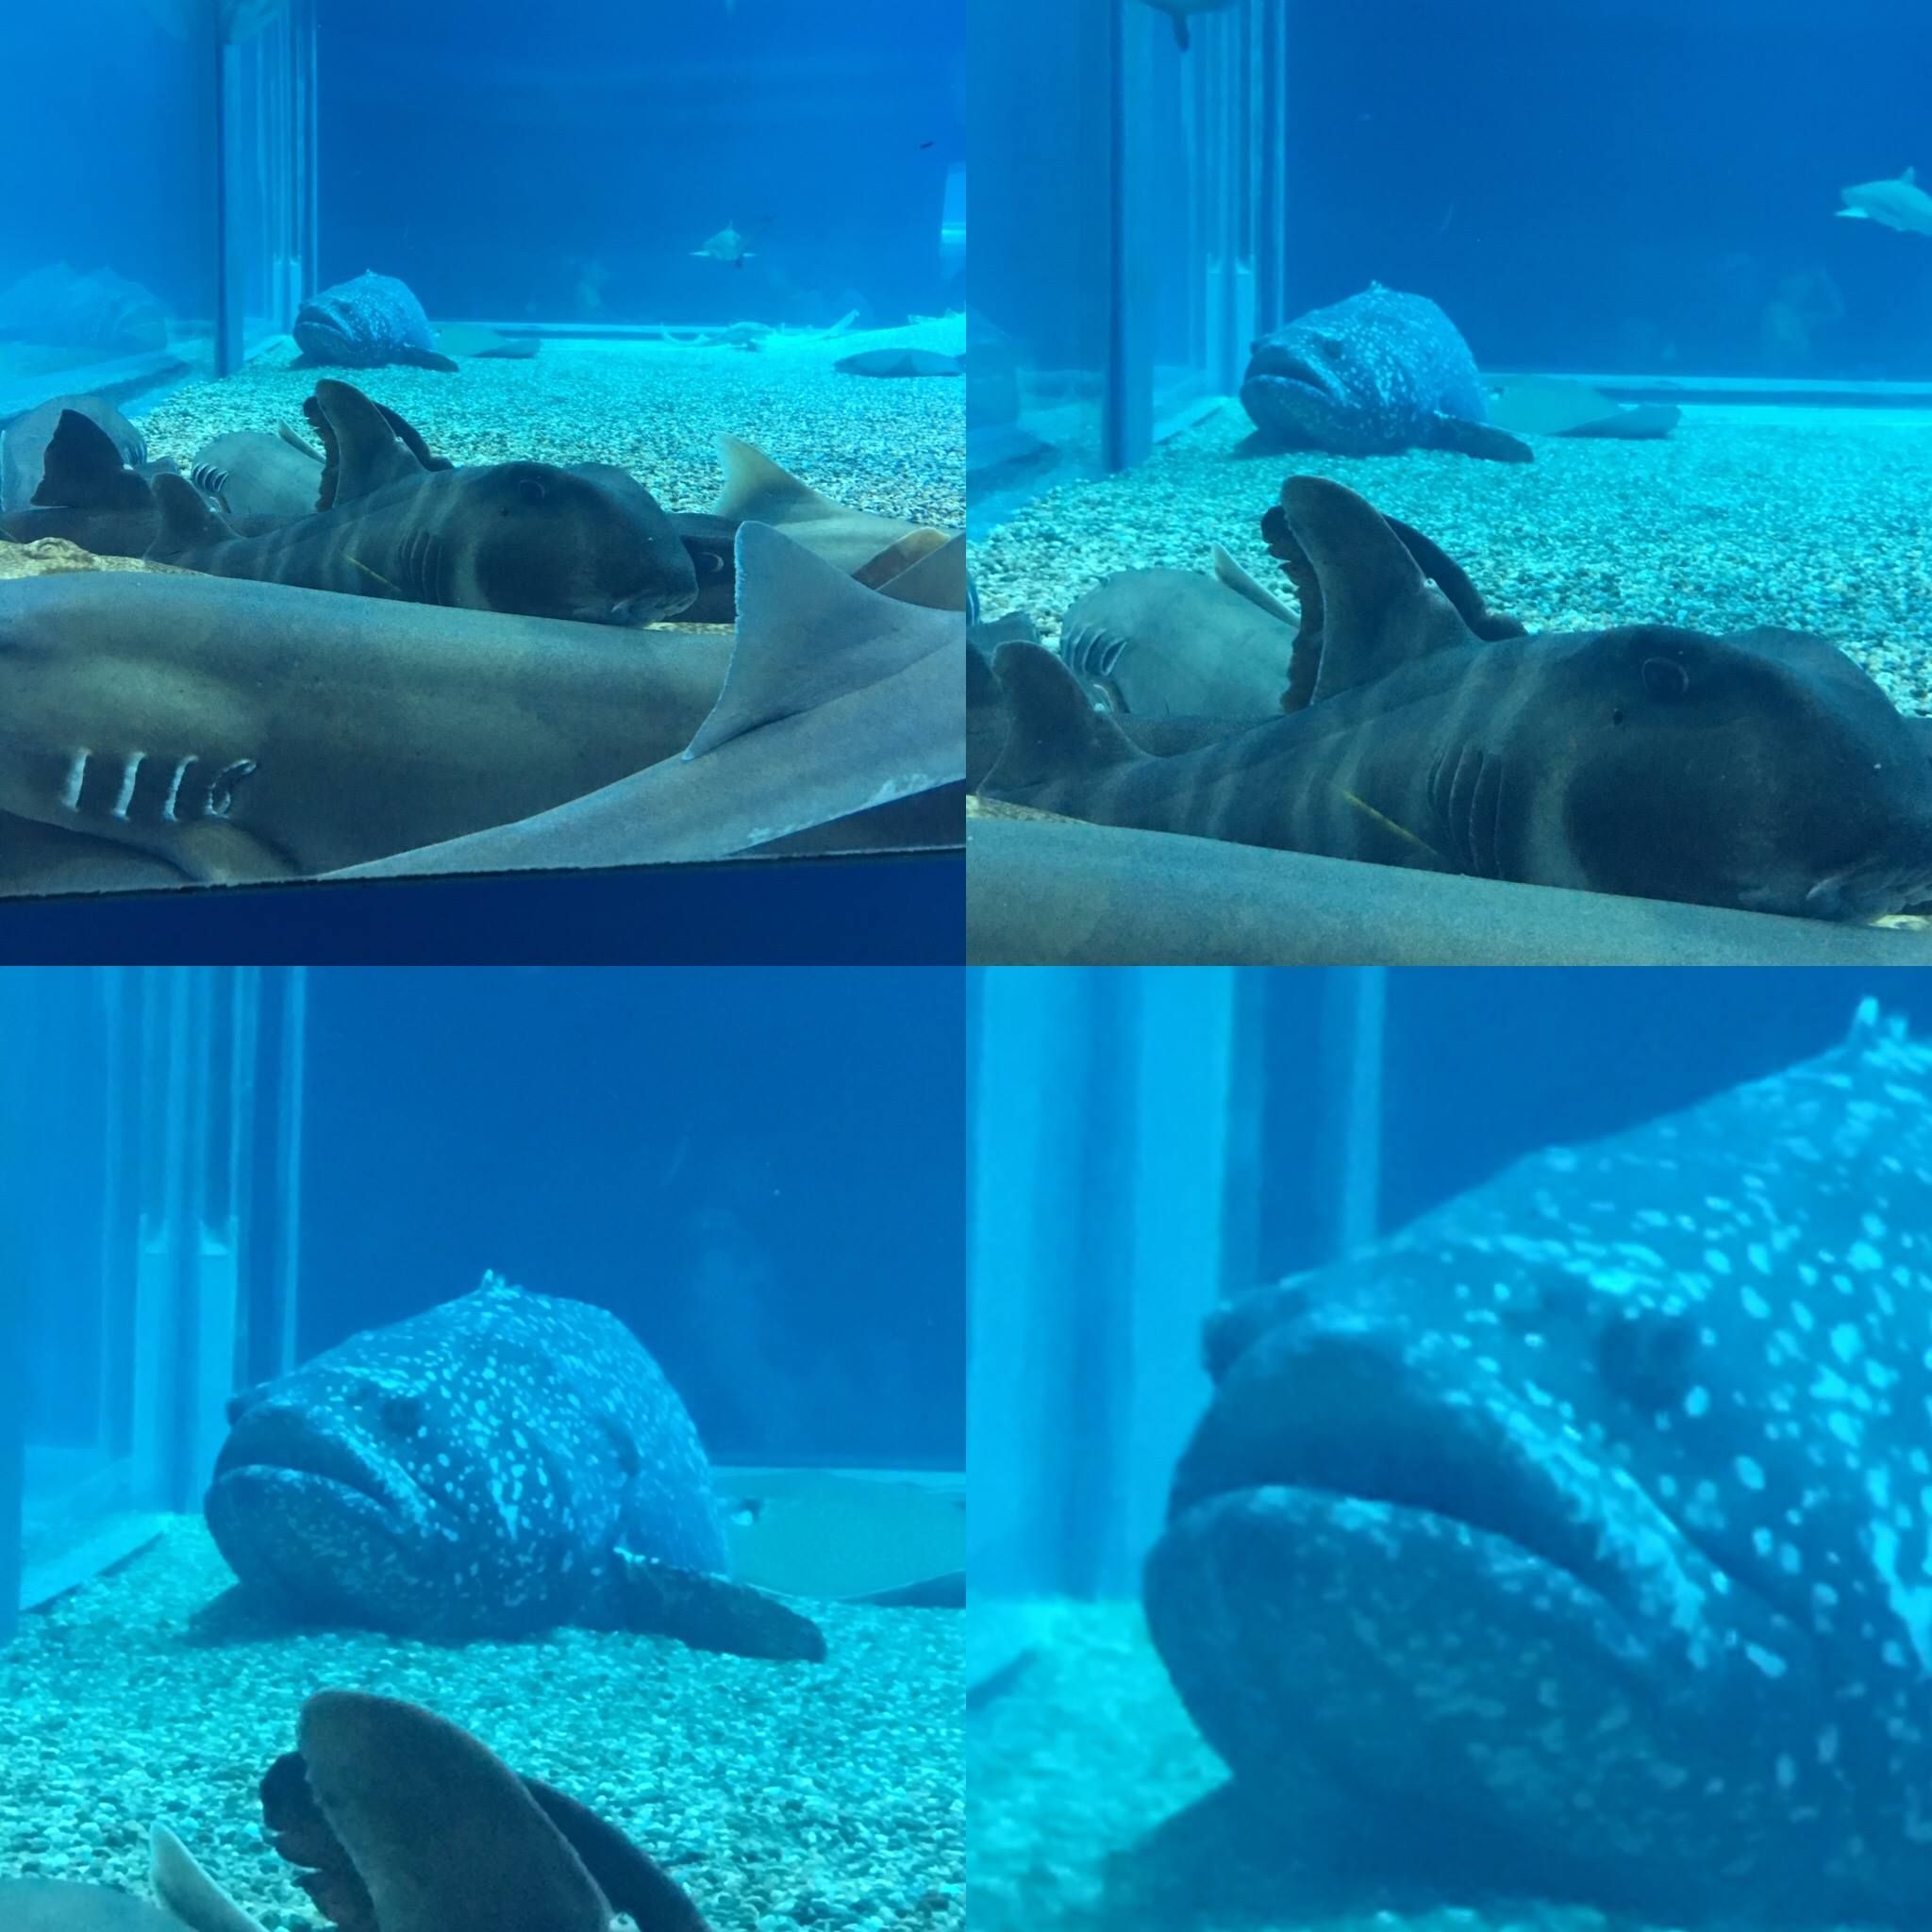 This grouper wasn't invited to the shark cuddle puddle